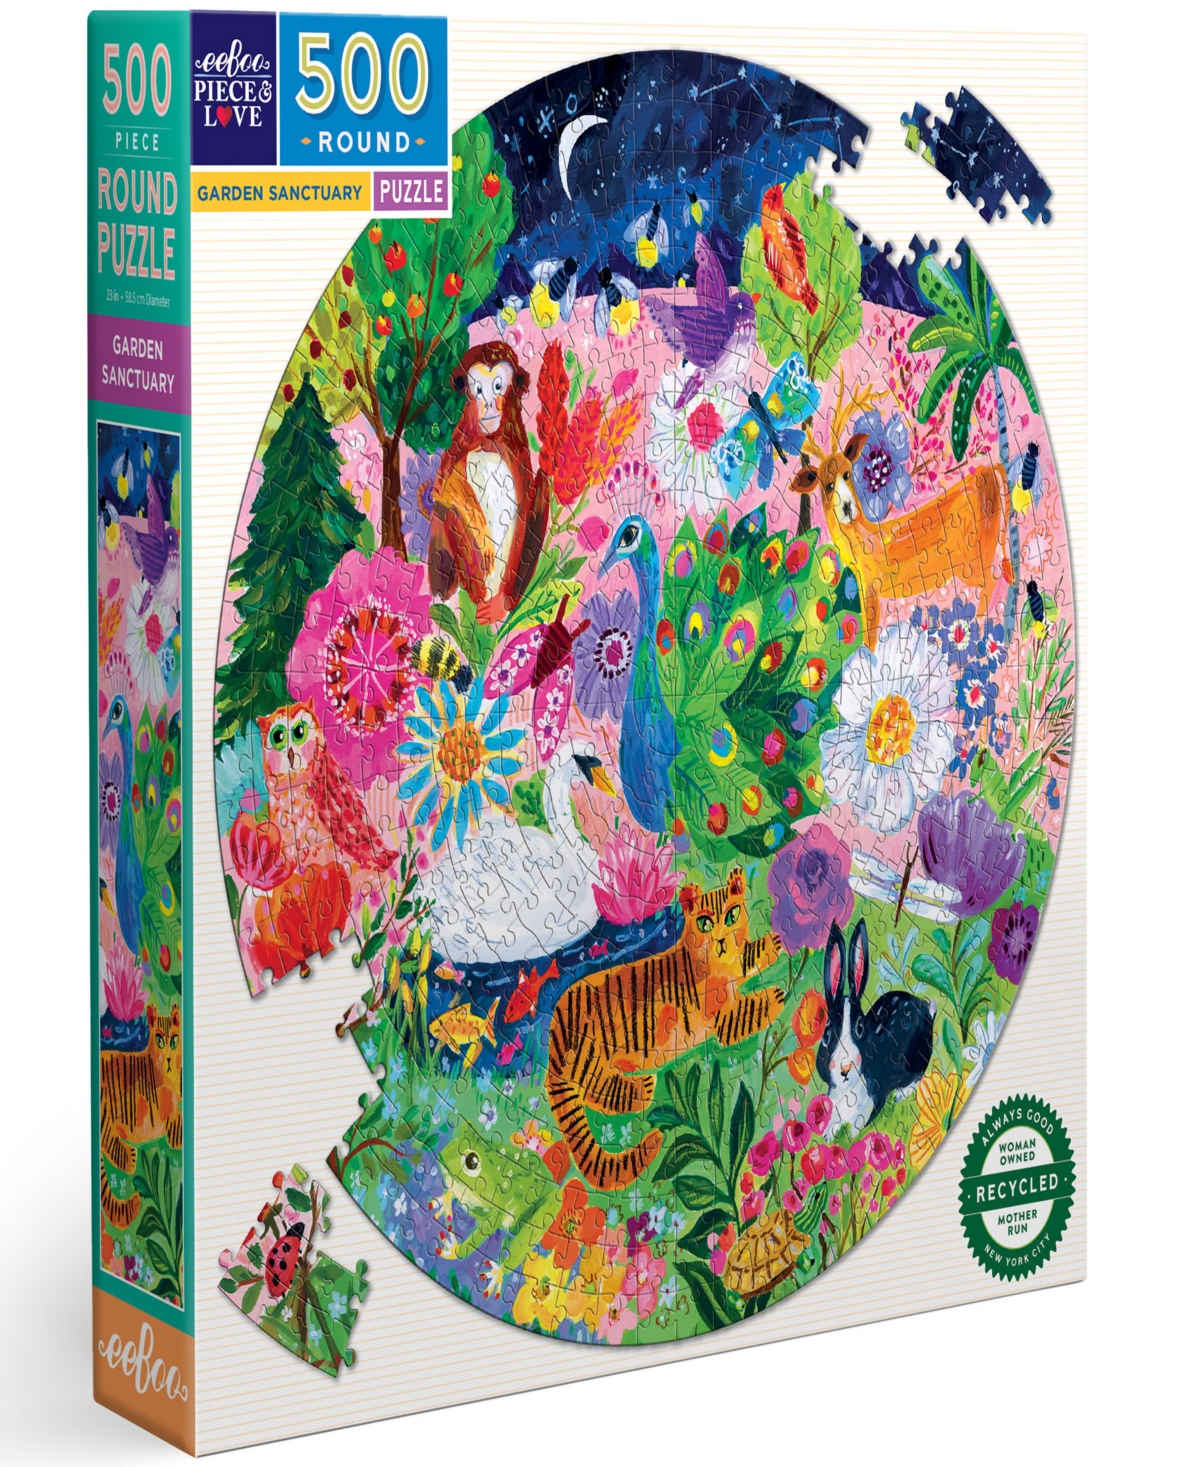 Eeboo Piece And Love Garden Sanctuary 500 Piece Round Adult Jigsaw Puzzle Set, Ages 14 And Up In Multi